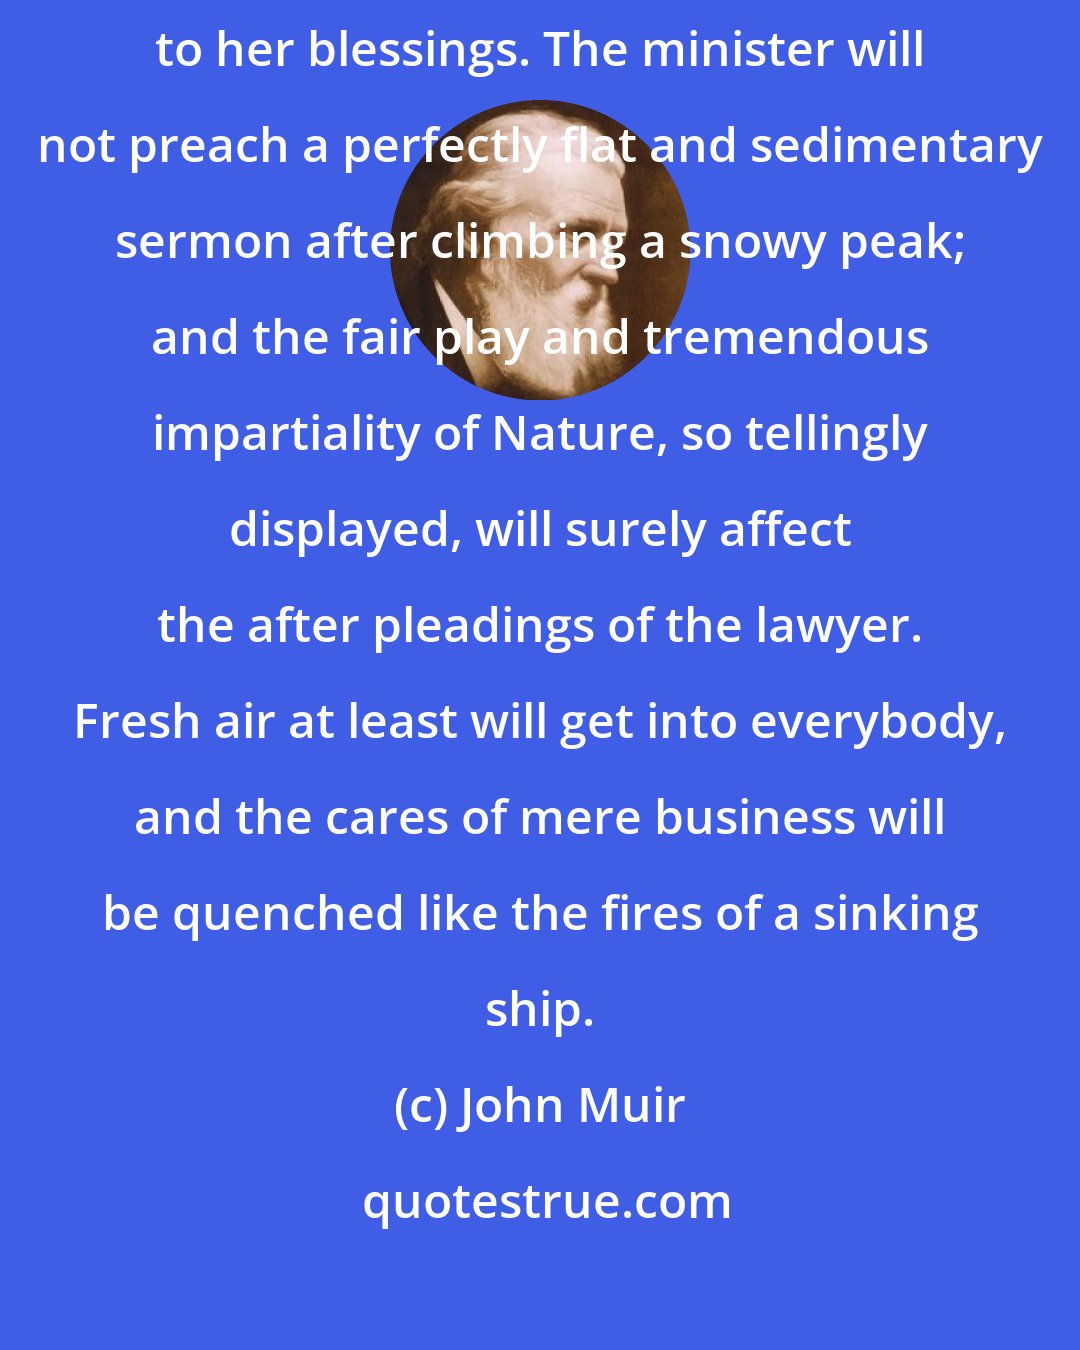 John Muir: None may wholly escape the good of Nature, however imperfectly exposed to her blessings. The minister will not preach a perfectly flat and sedimentary sermon after climbing a snowy peak; and the fair play and tremendous impartiality of Nature, so tellingly displayed, will surely affect the after pleadings of the lawyer. Fresh air at least will get into everybody, and the cares of mere business will be quenched like the fires of a sinking ship.